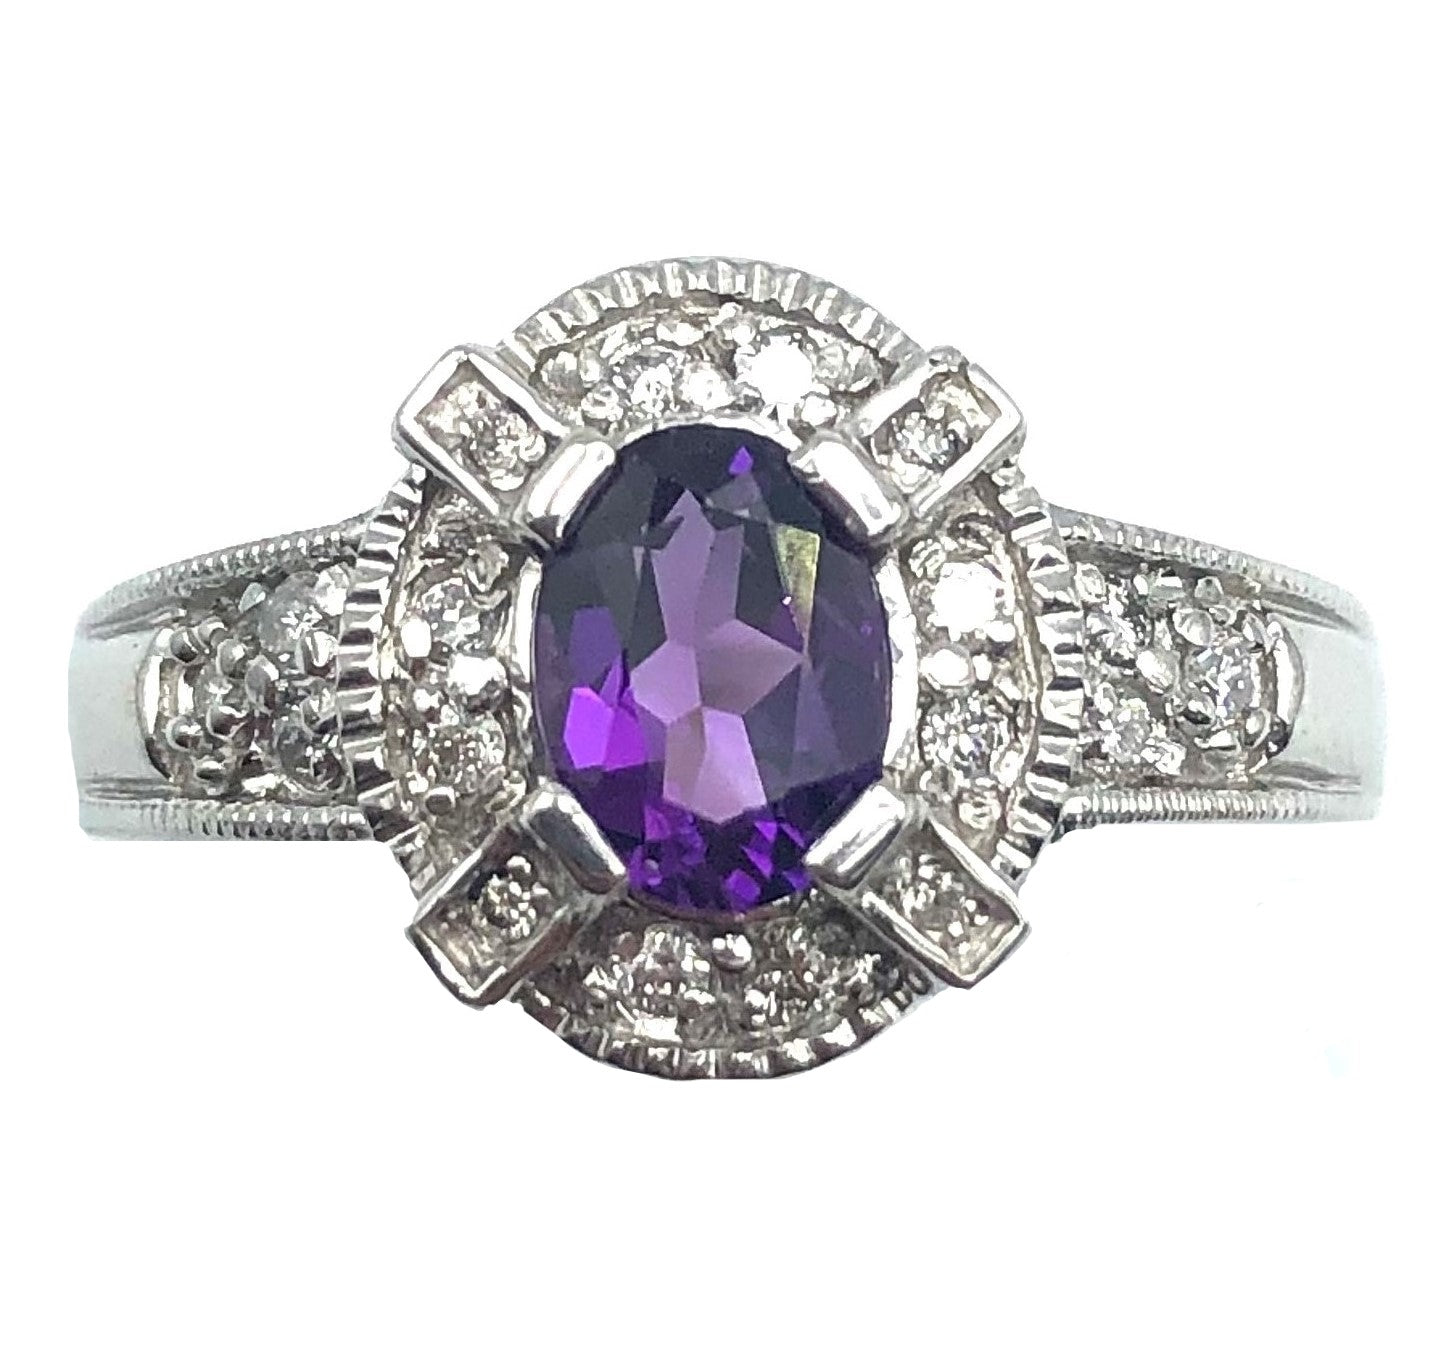 14K White Gold Amethyst and Diamond Ring - Le Vive Jewelry in Riverside